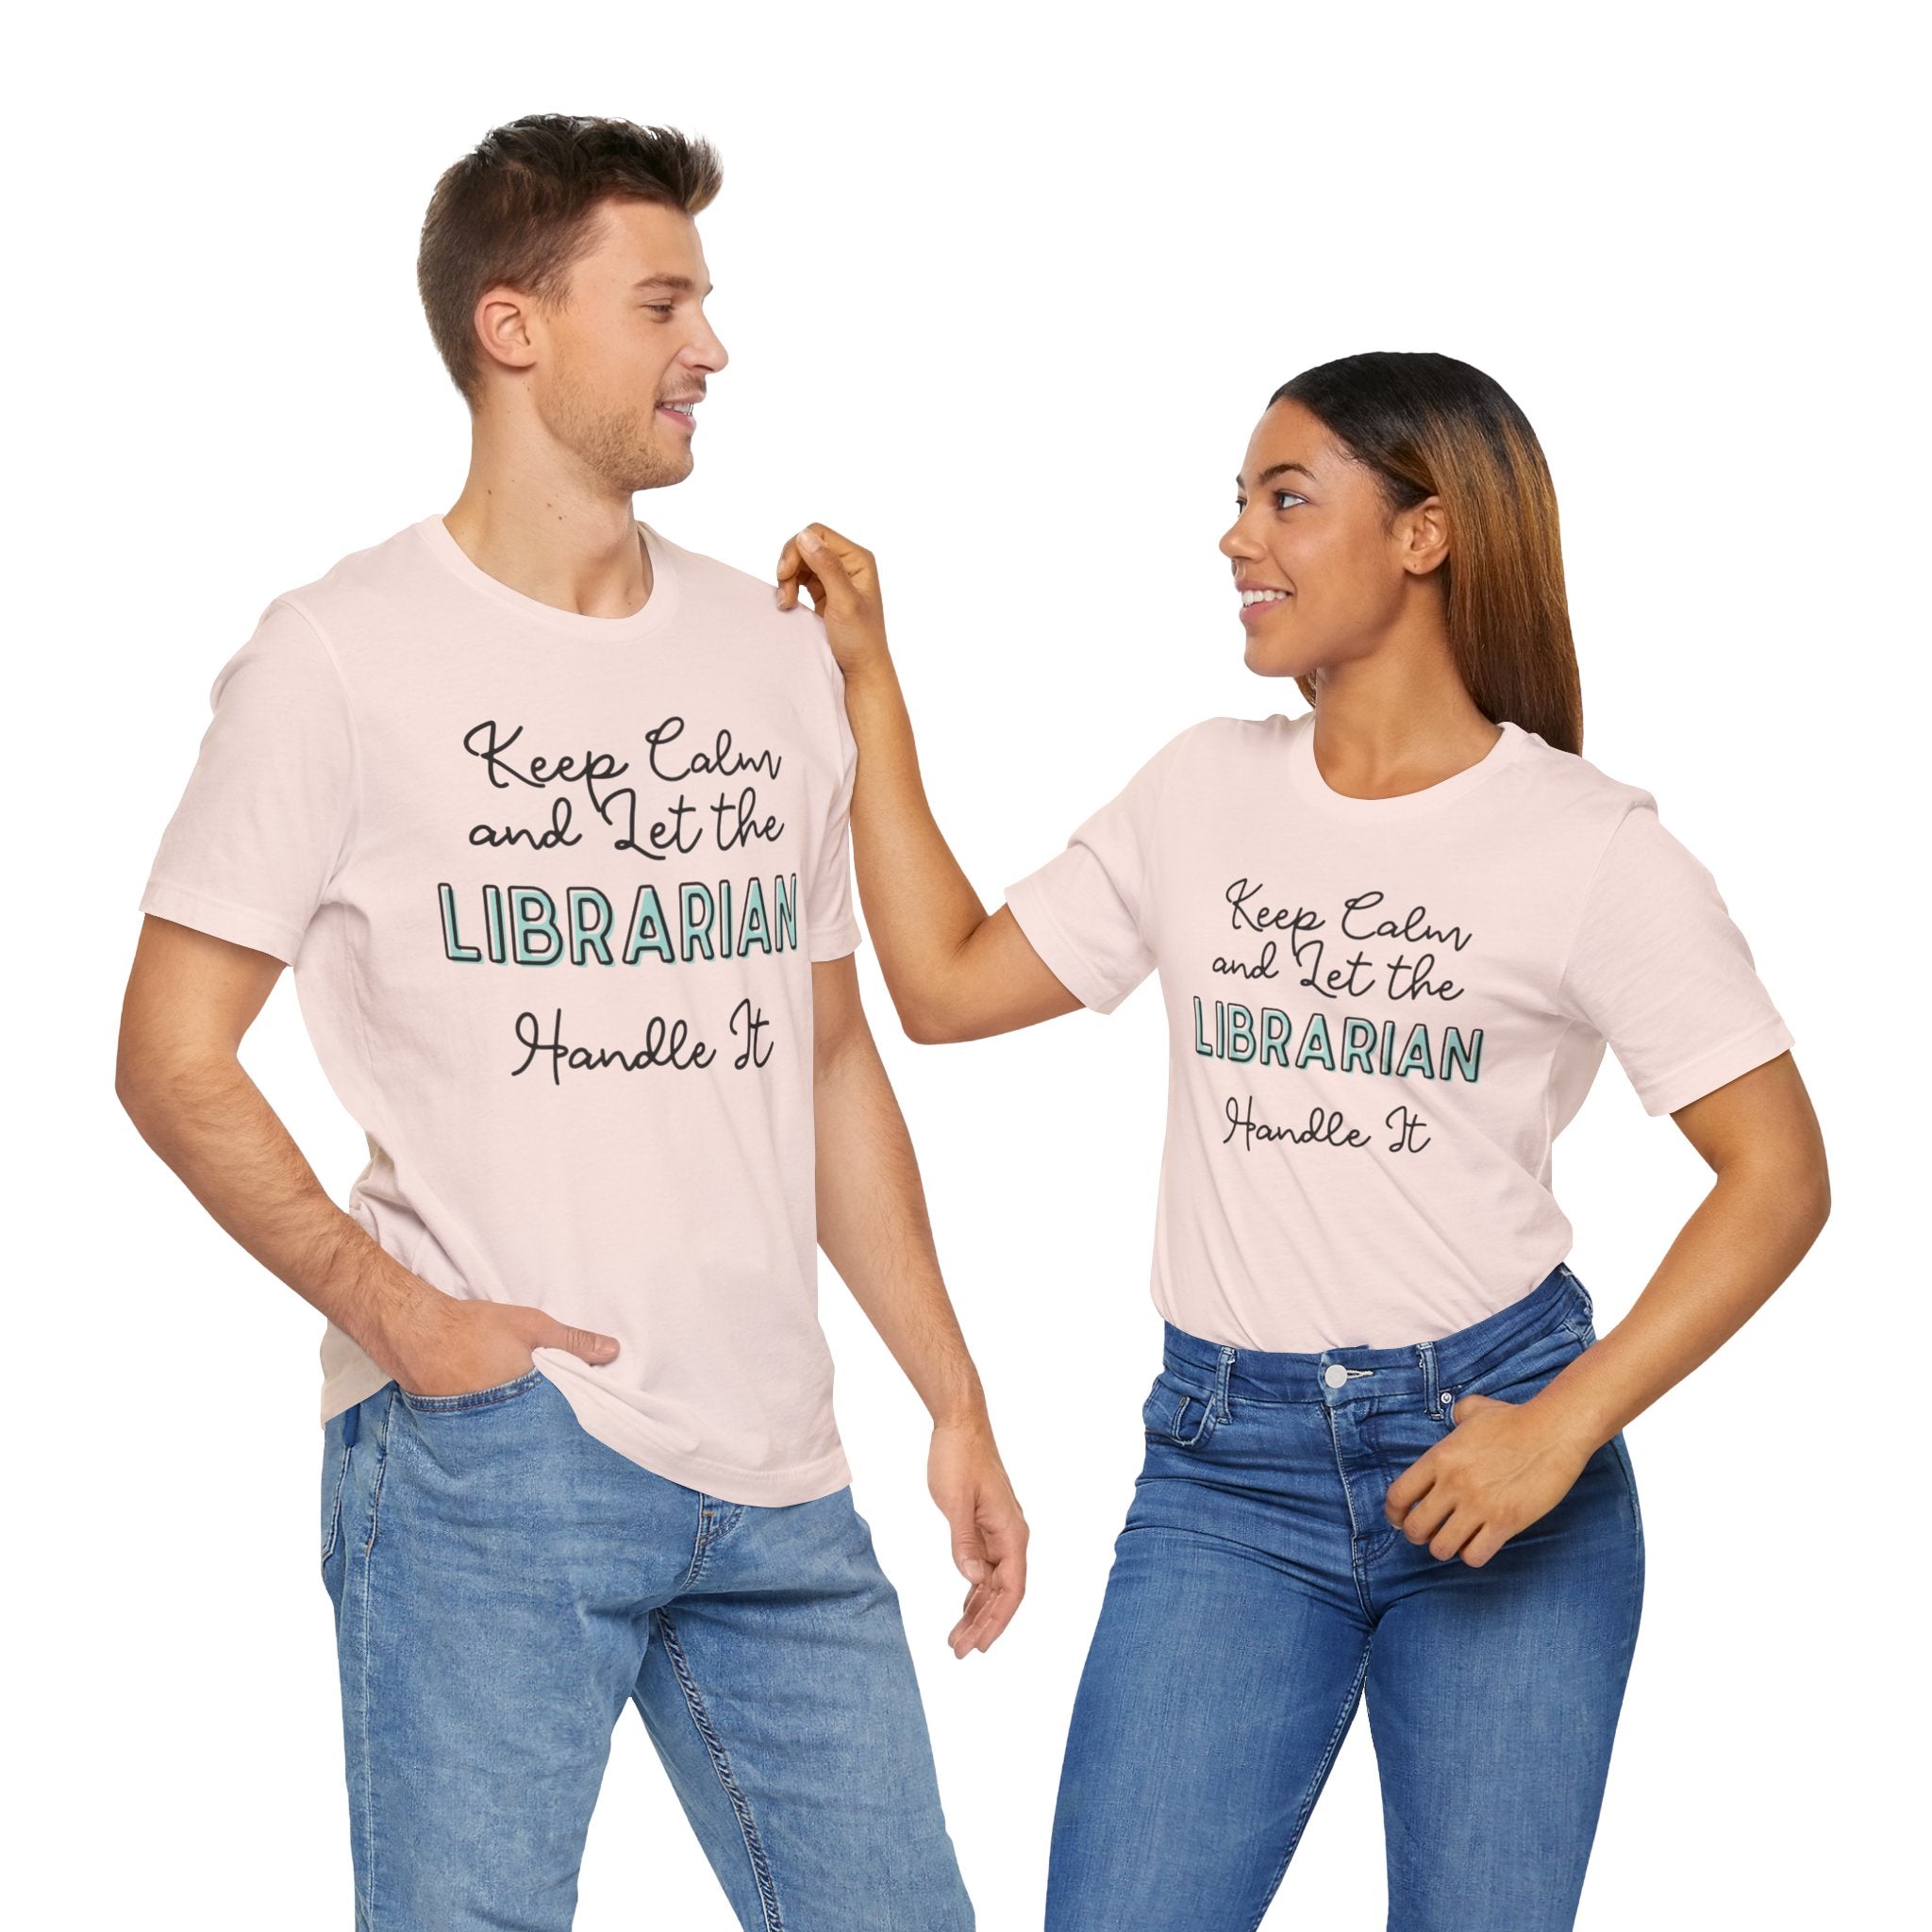 Keep Calm and let the Librarian handle It - Jersey Short Sleeve Tee